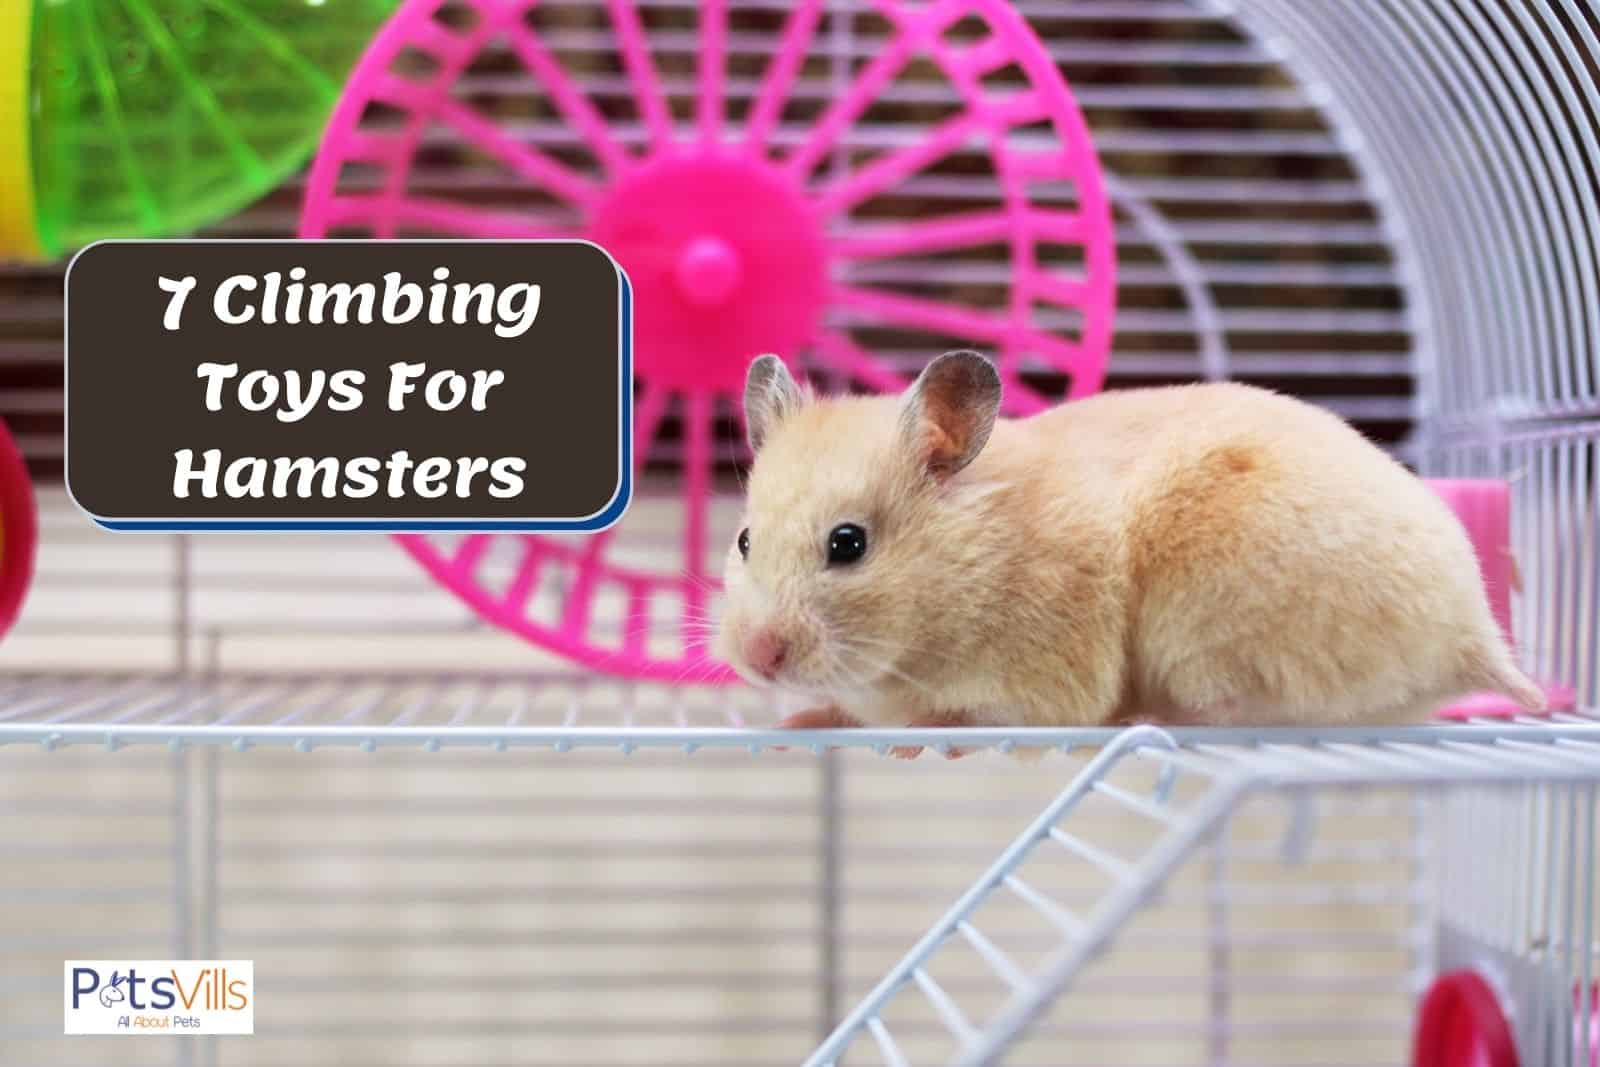 heave Hamster Wooden Ladders,Natural Wood Hamster Ladder Parrot Climbing Stairs Cage Platform Accessories for Dwarf Hamster Mice Gerbils and Other Small Animals 3 Stairs* 